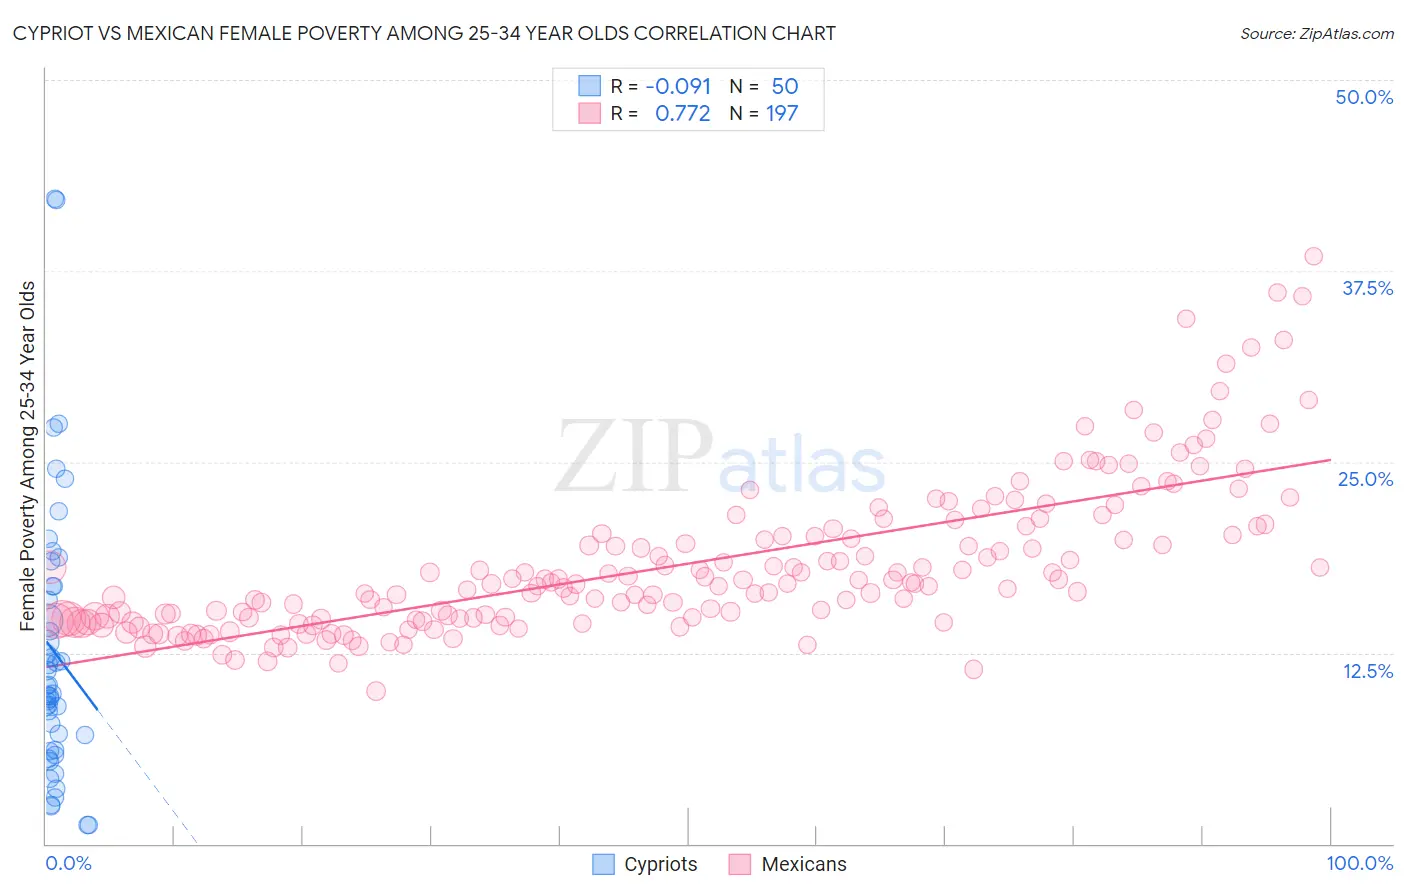 Cypriot vs Mexican Female Poverty Among 25-34 Year Olds